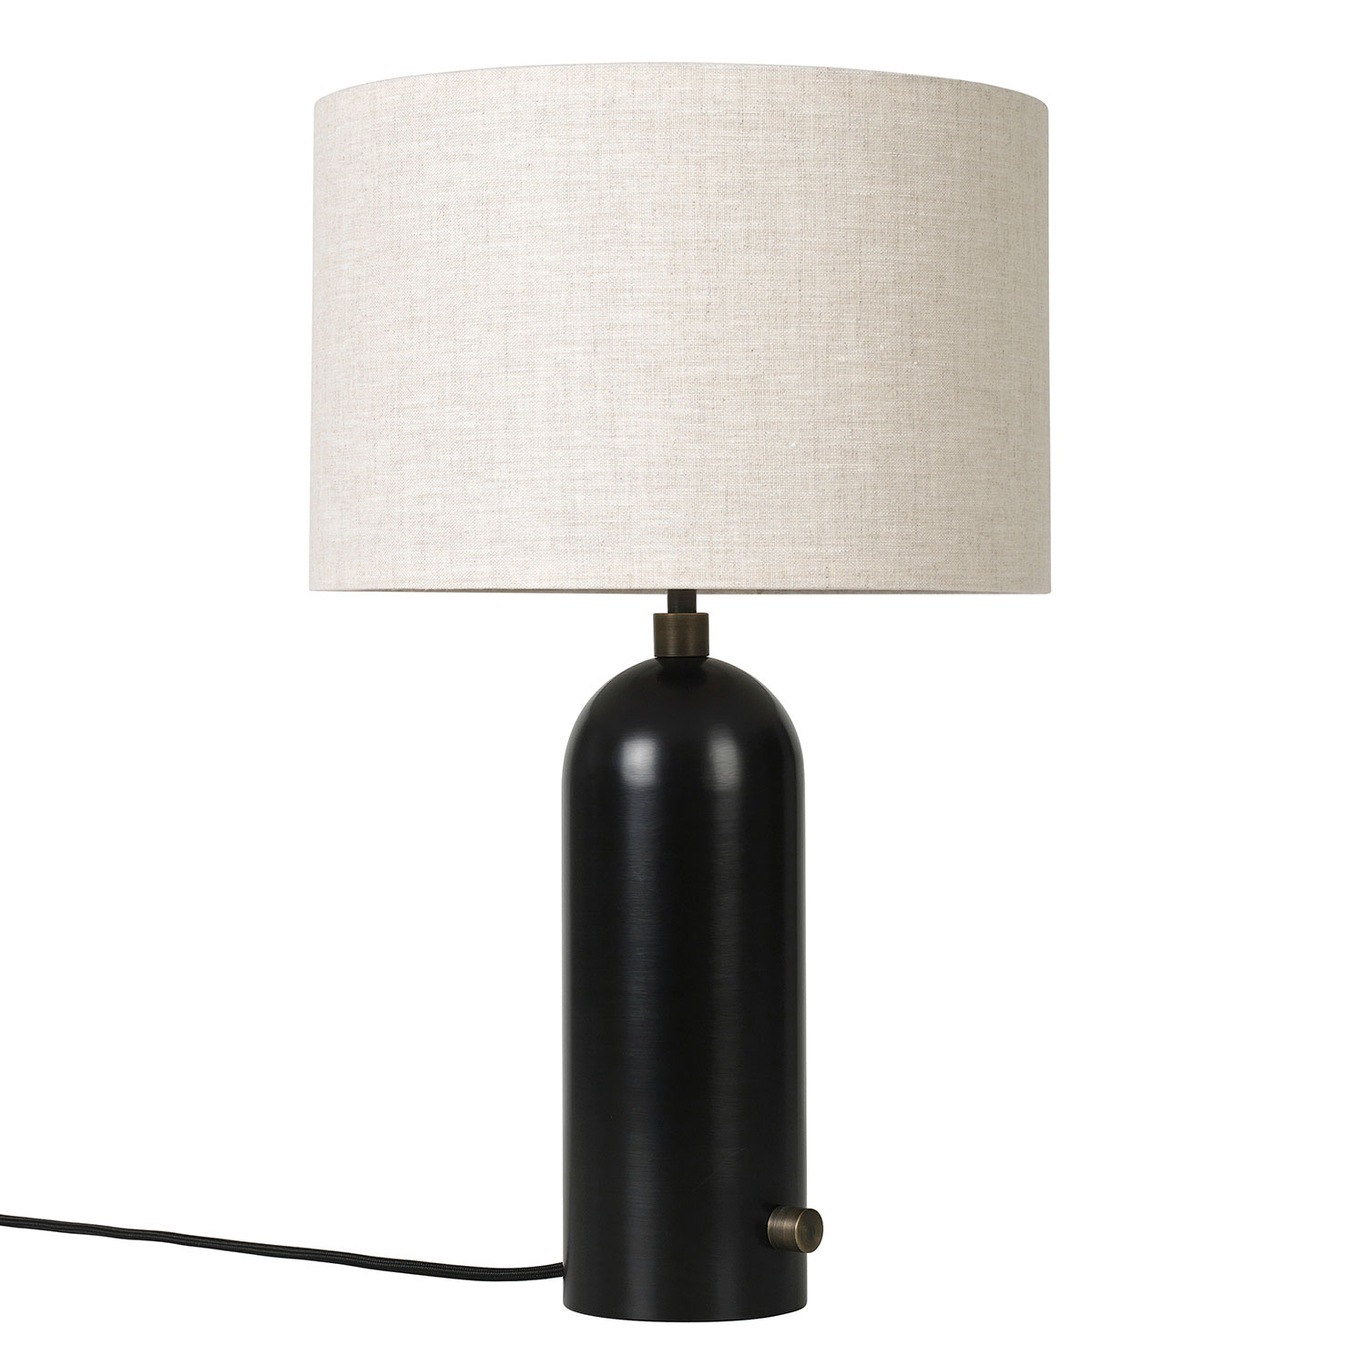 Gravity Table Lamp Small, Black Steel / Canvas